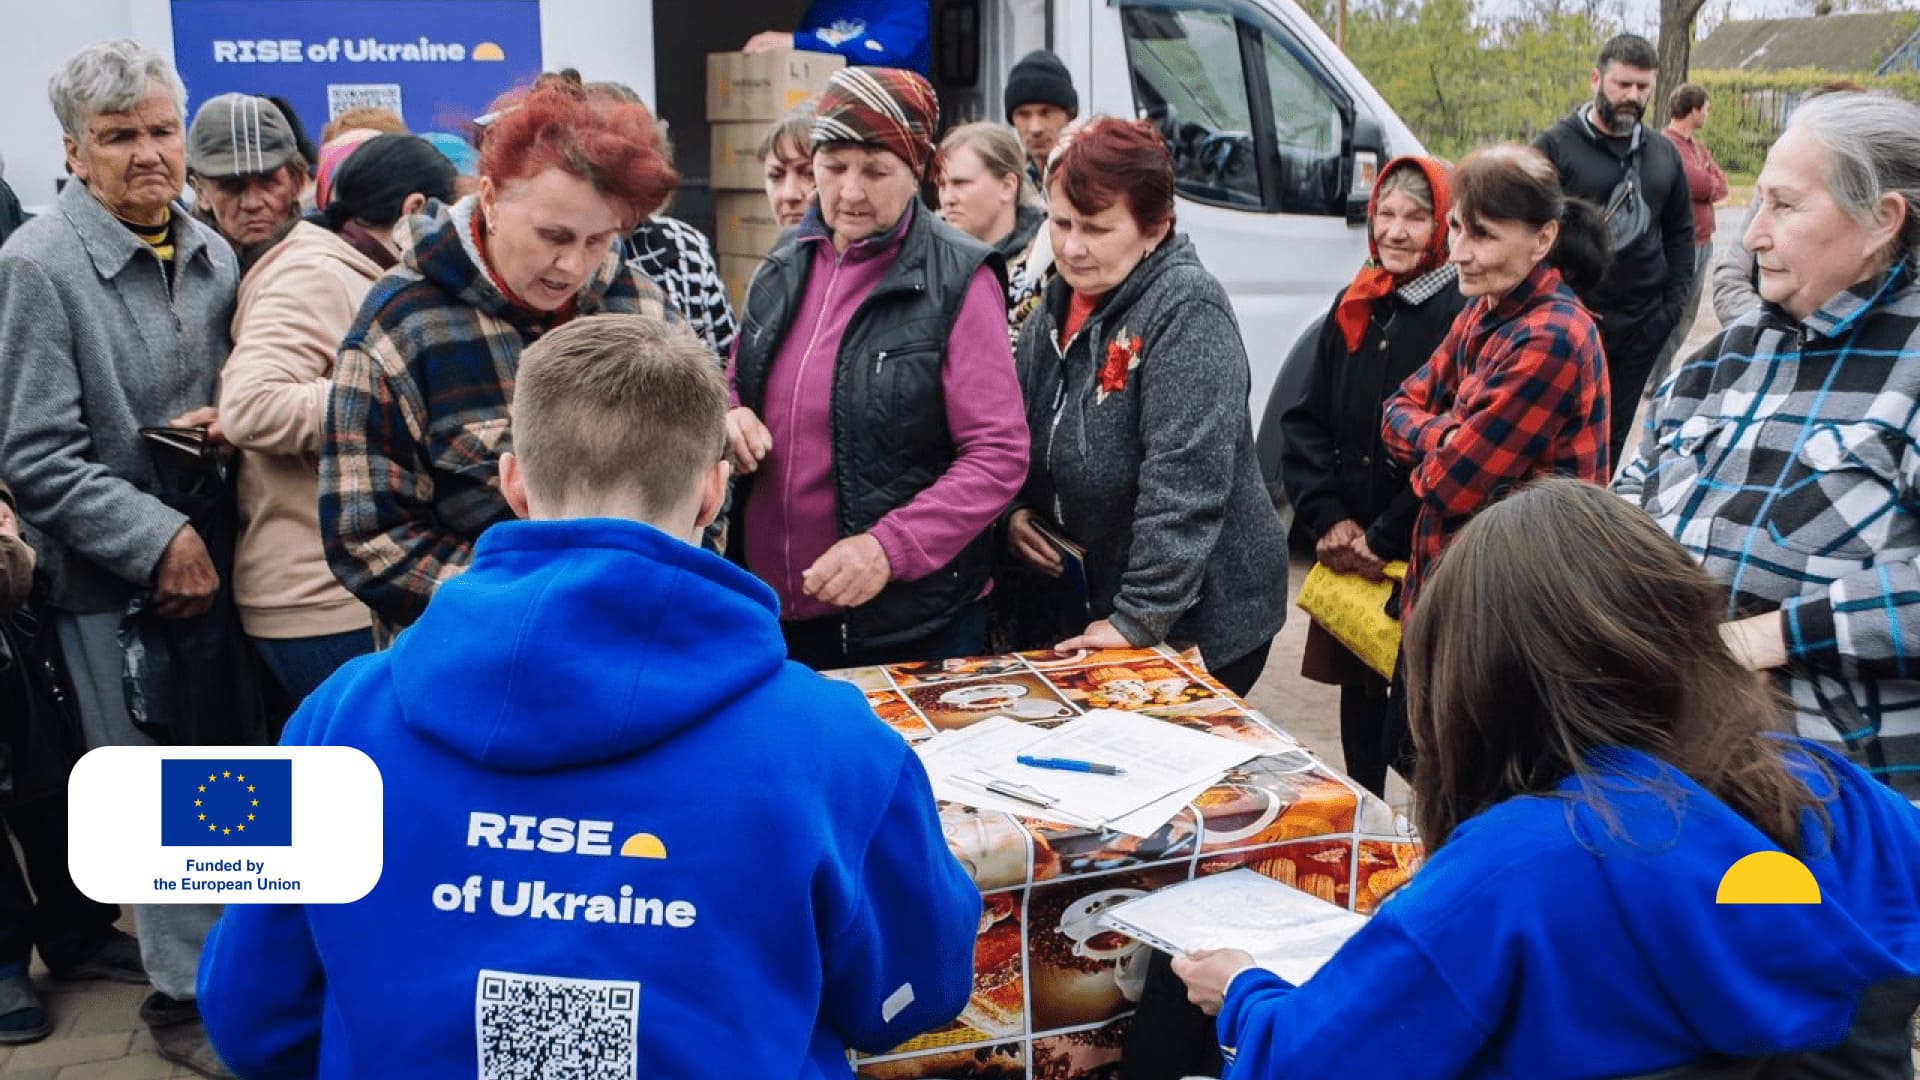 How we changed the lives of people in different parts of Ukraine in 4 months - Rise of Ukraine